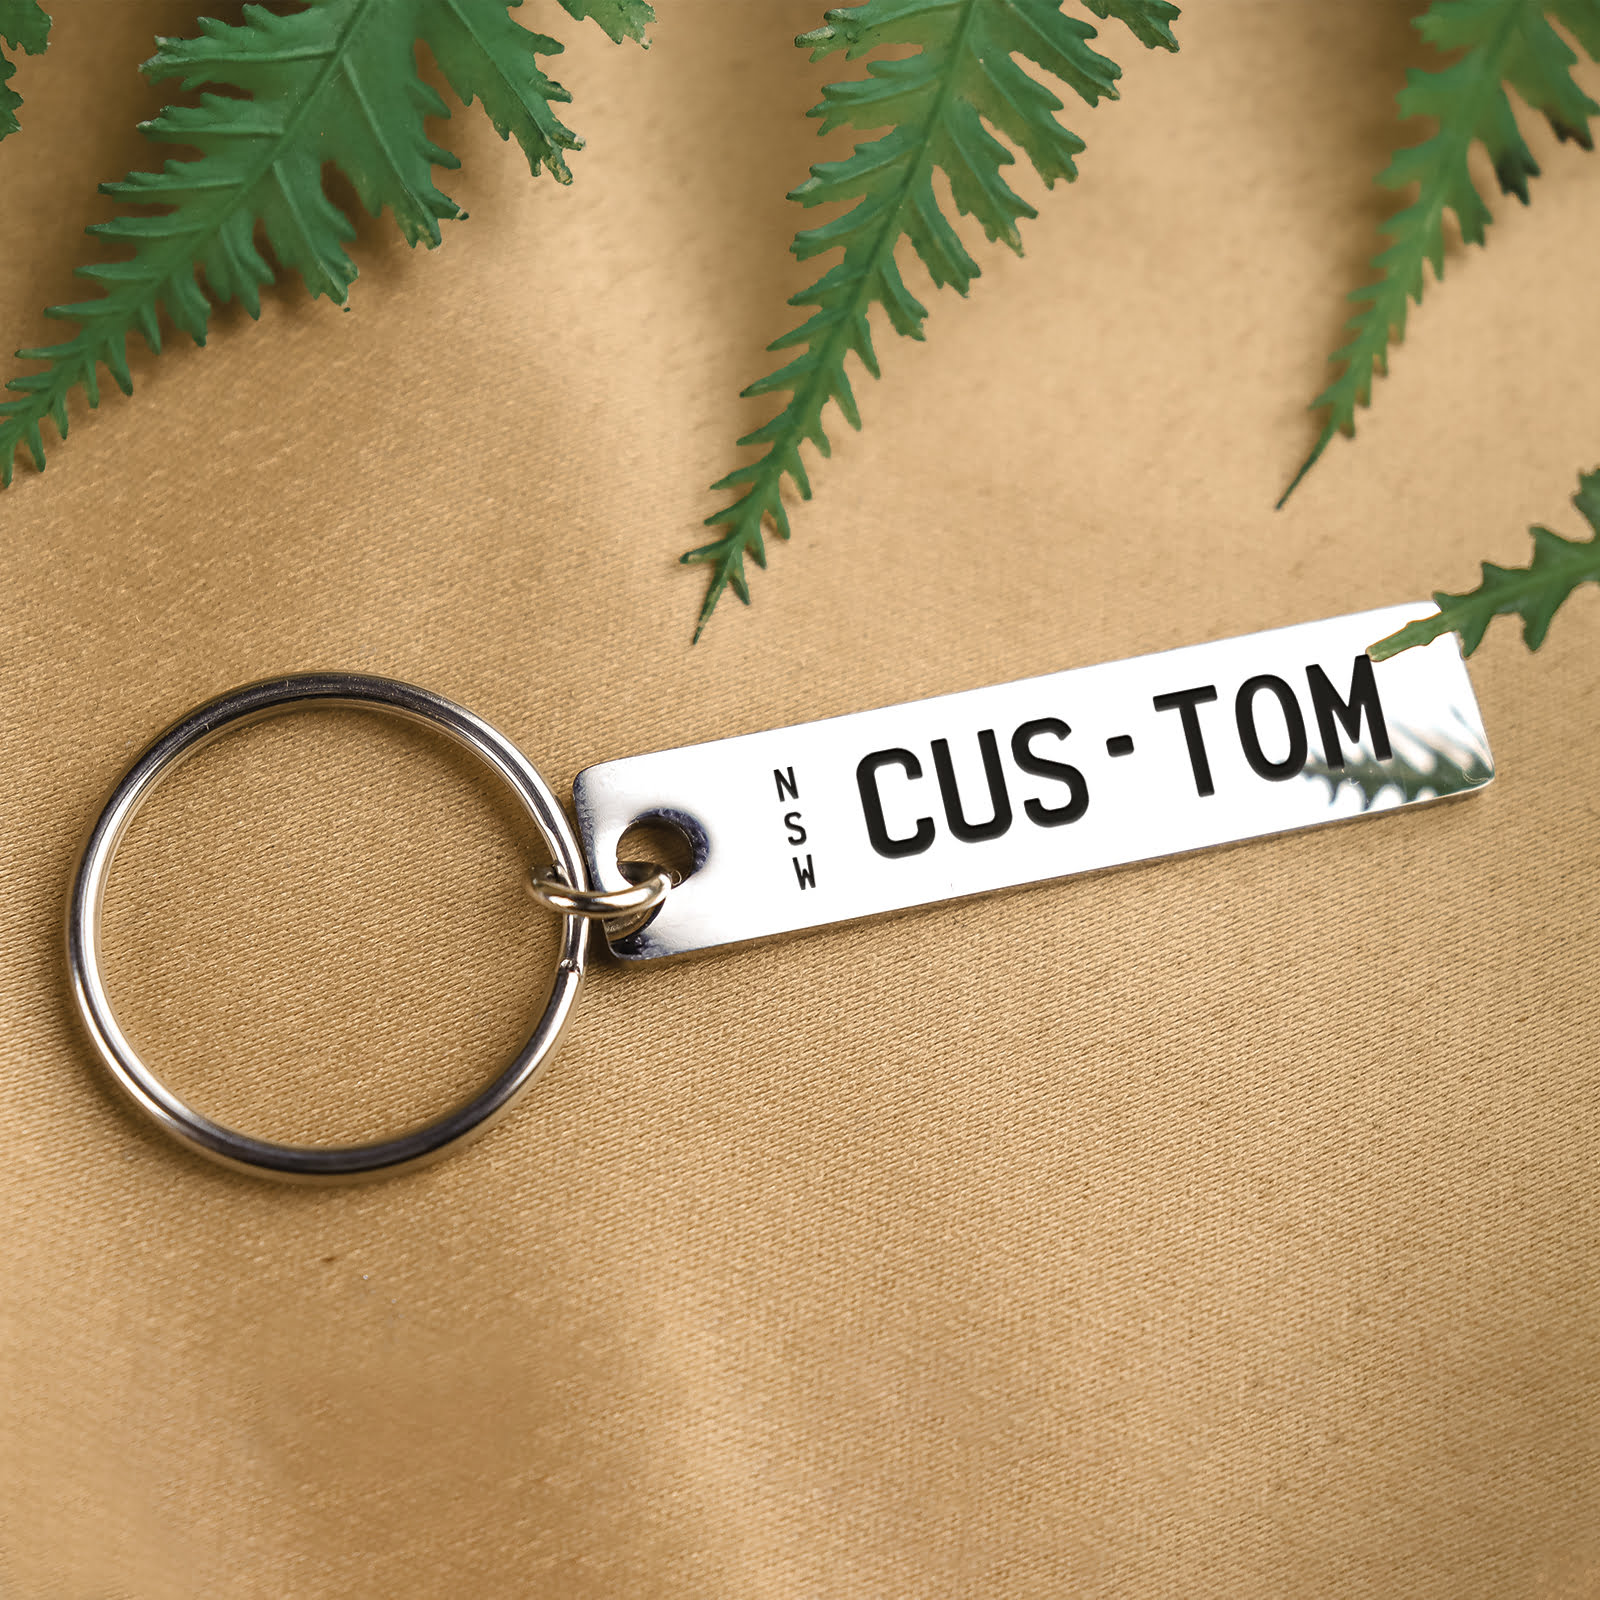 Show off style and personality with our metal bar plateit keyring